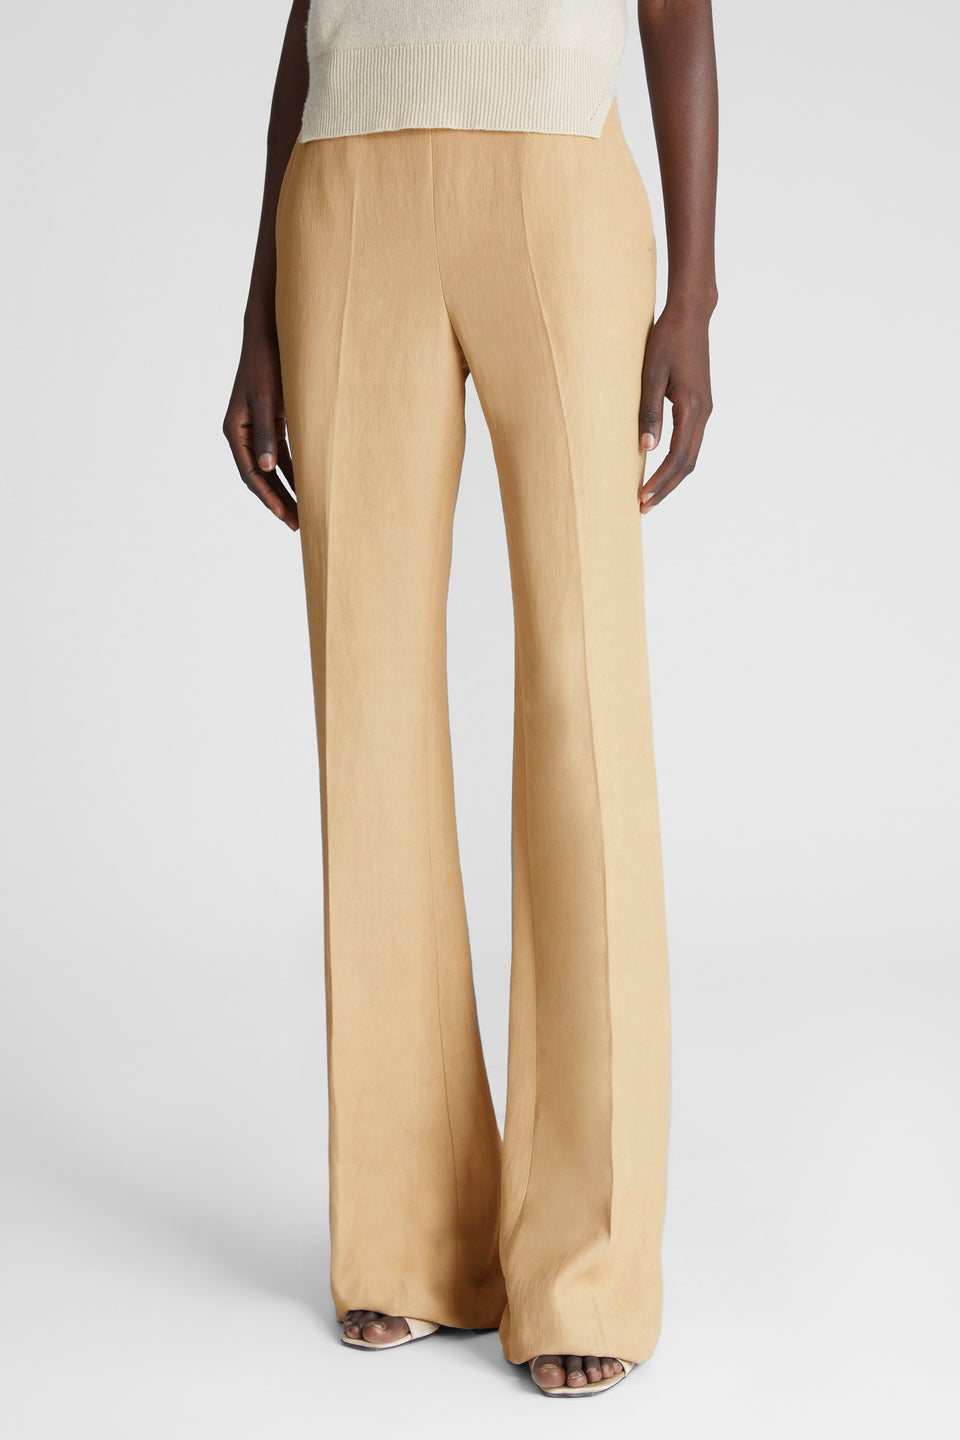 Flared trousers in beige fabric